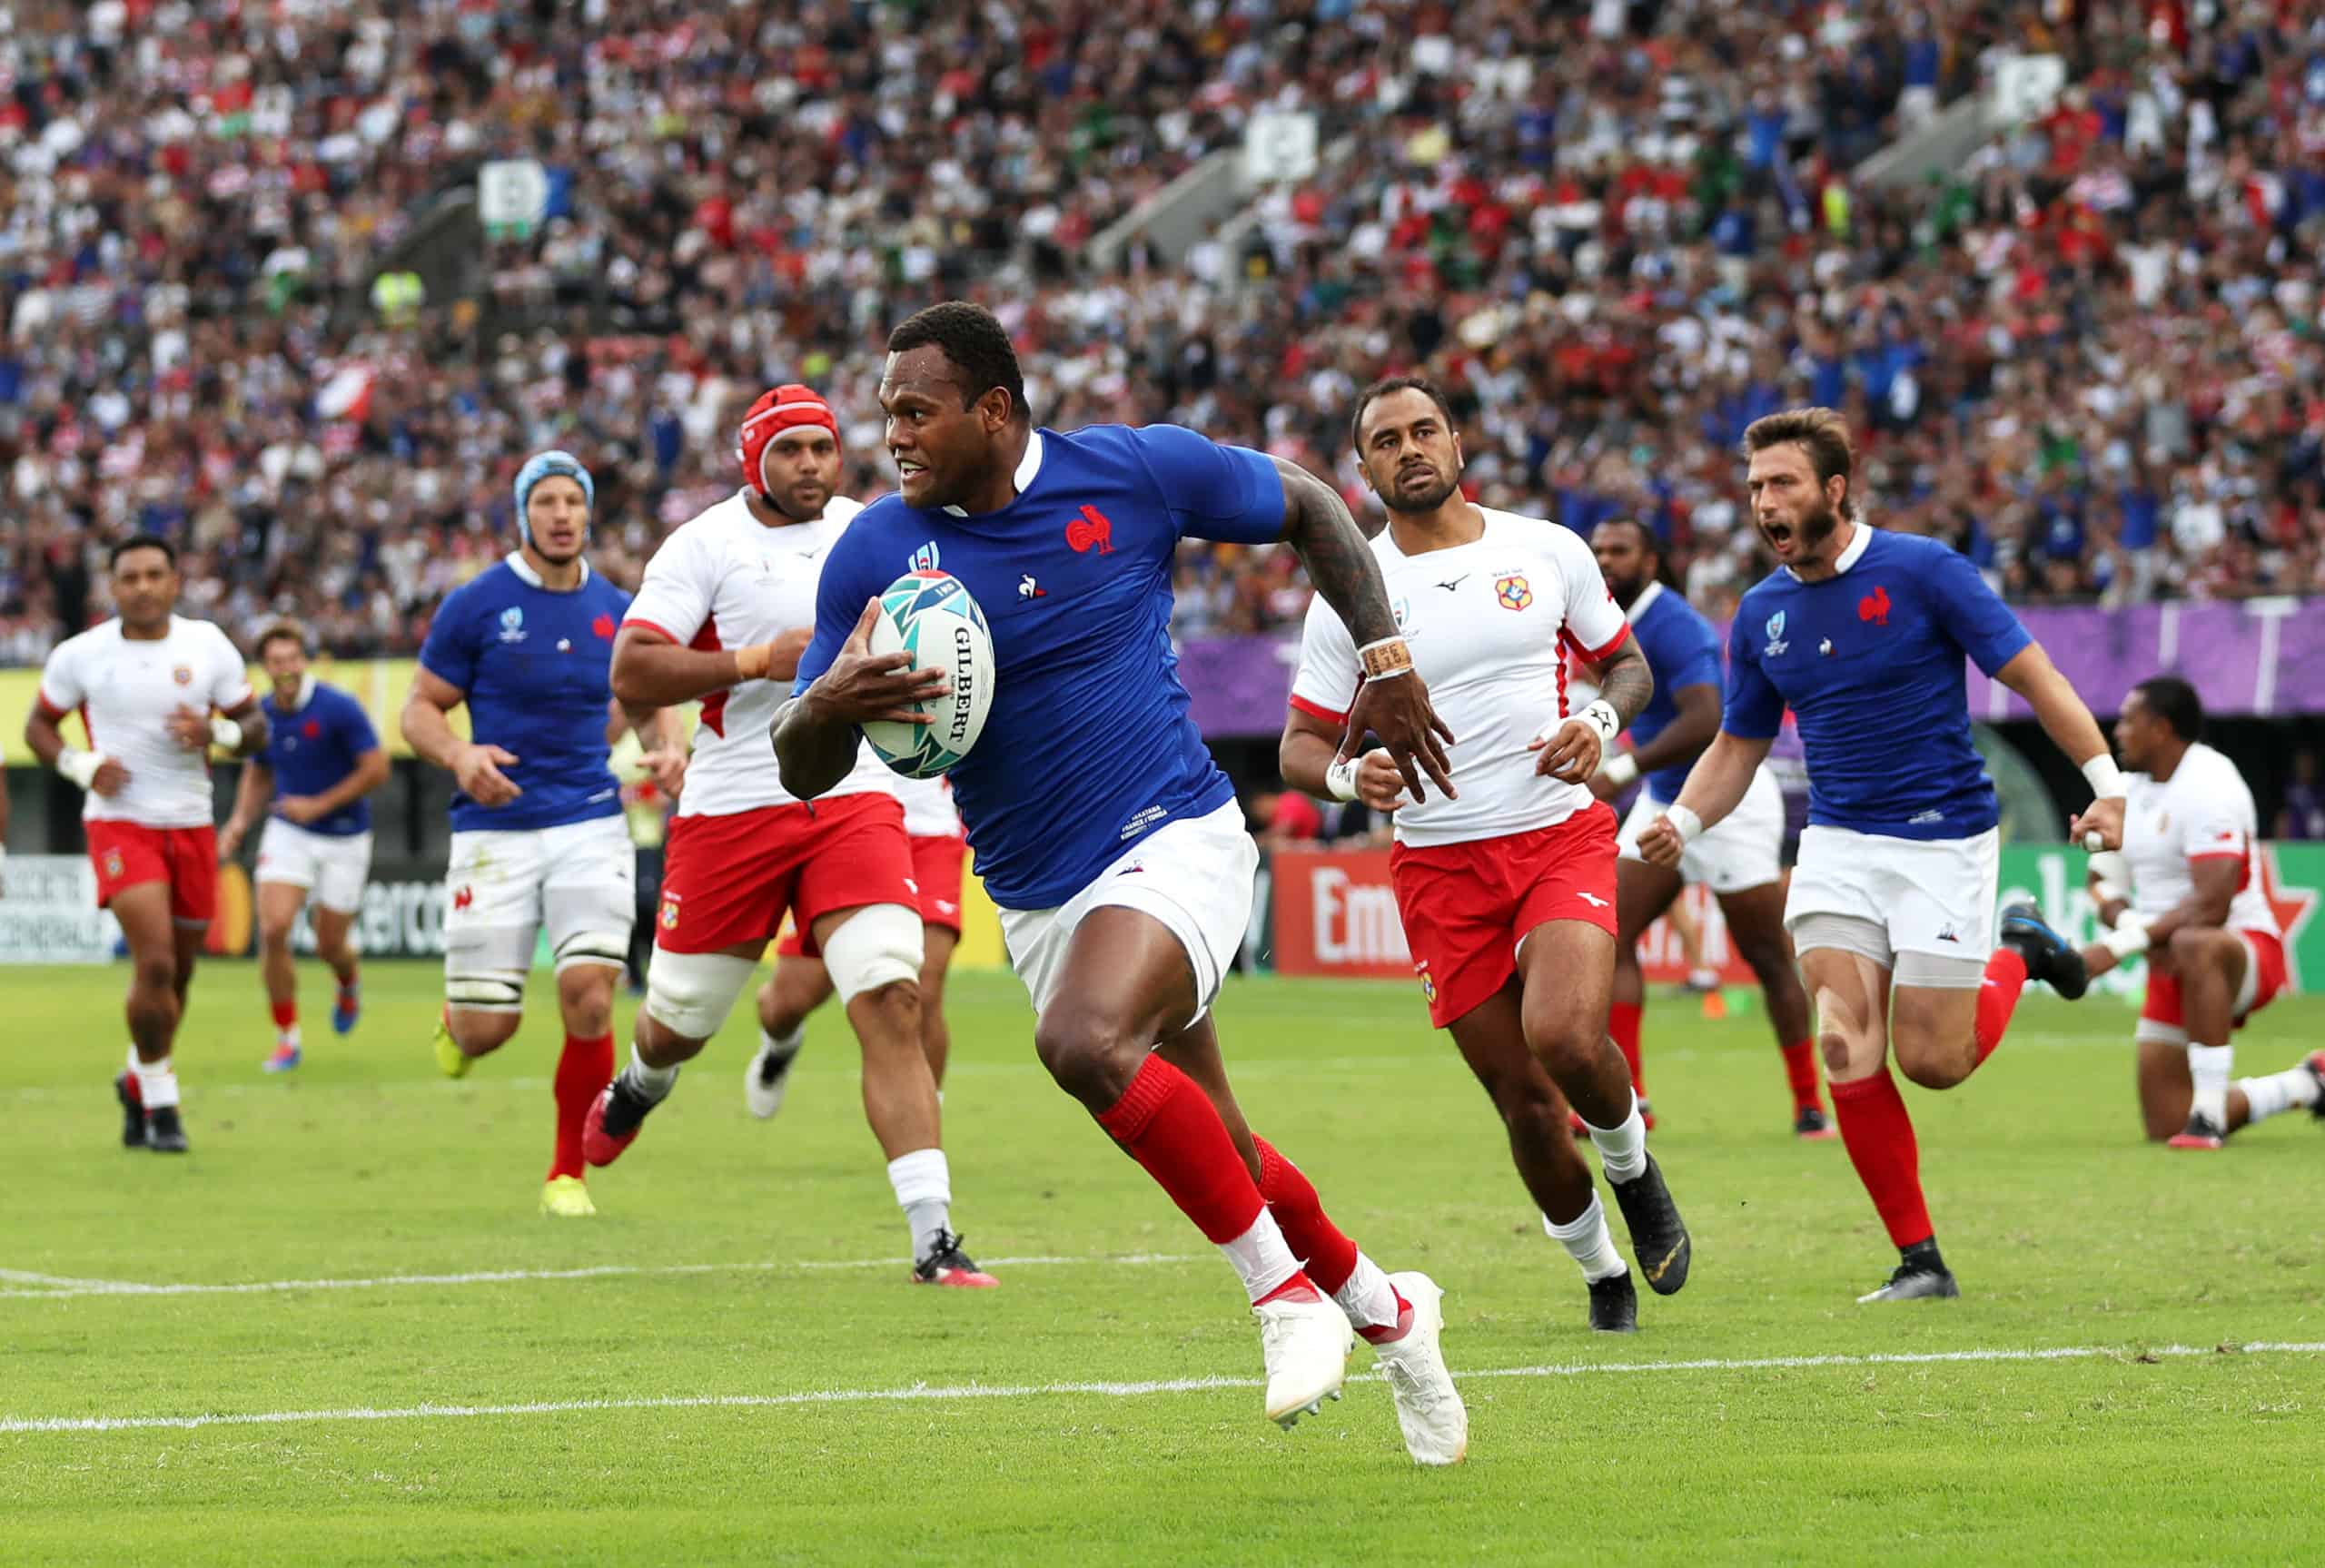 Rugby World Cup: Will France win their first title?